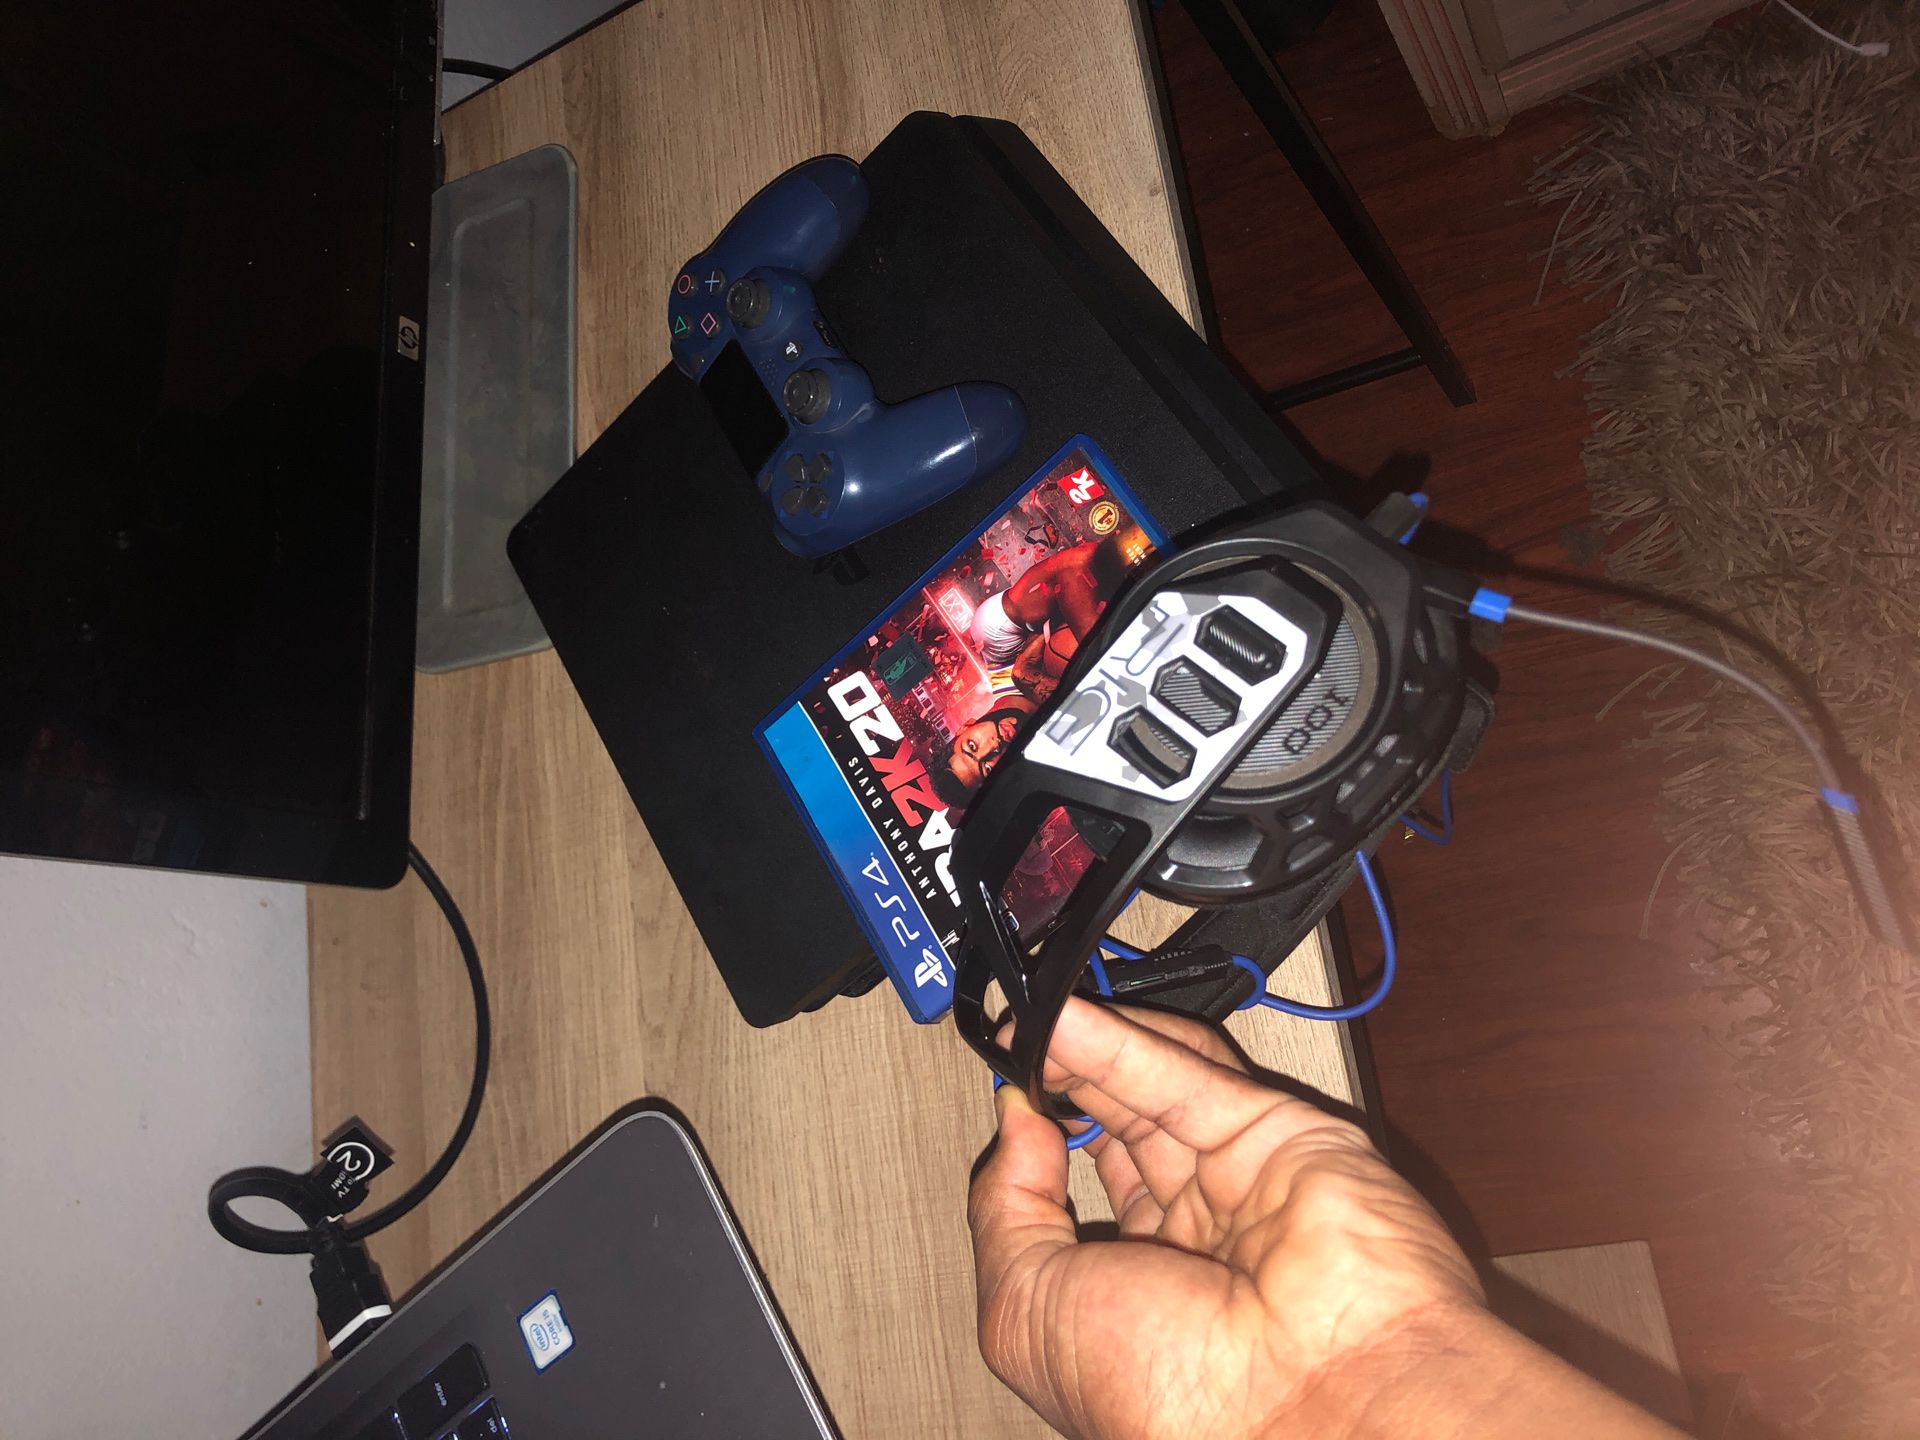 Ps4 & controller , turtle beach recon headset , NBA 2k20 (all cords)